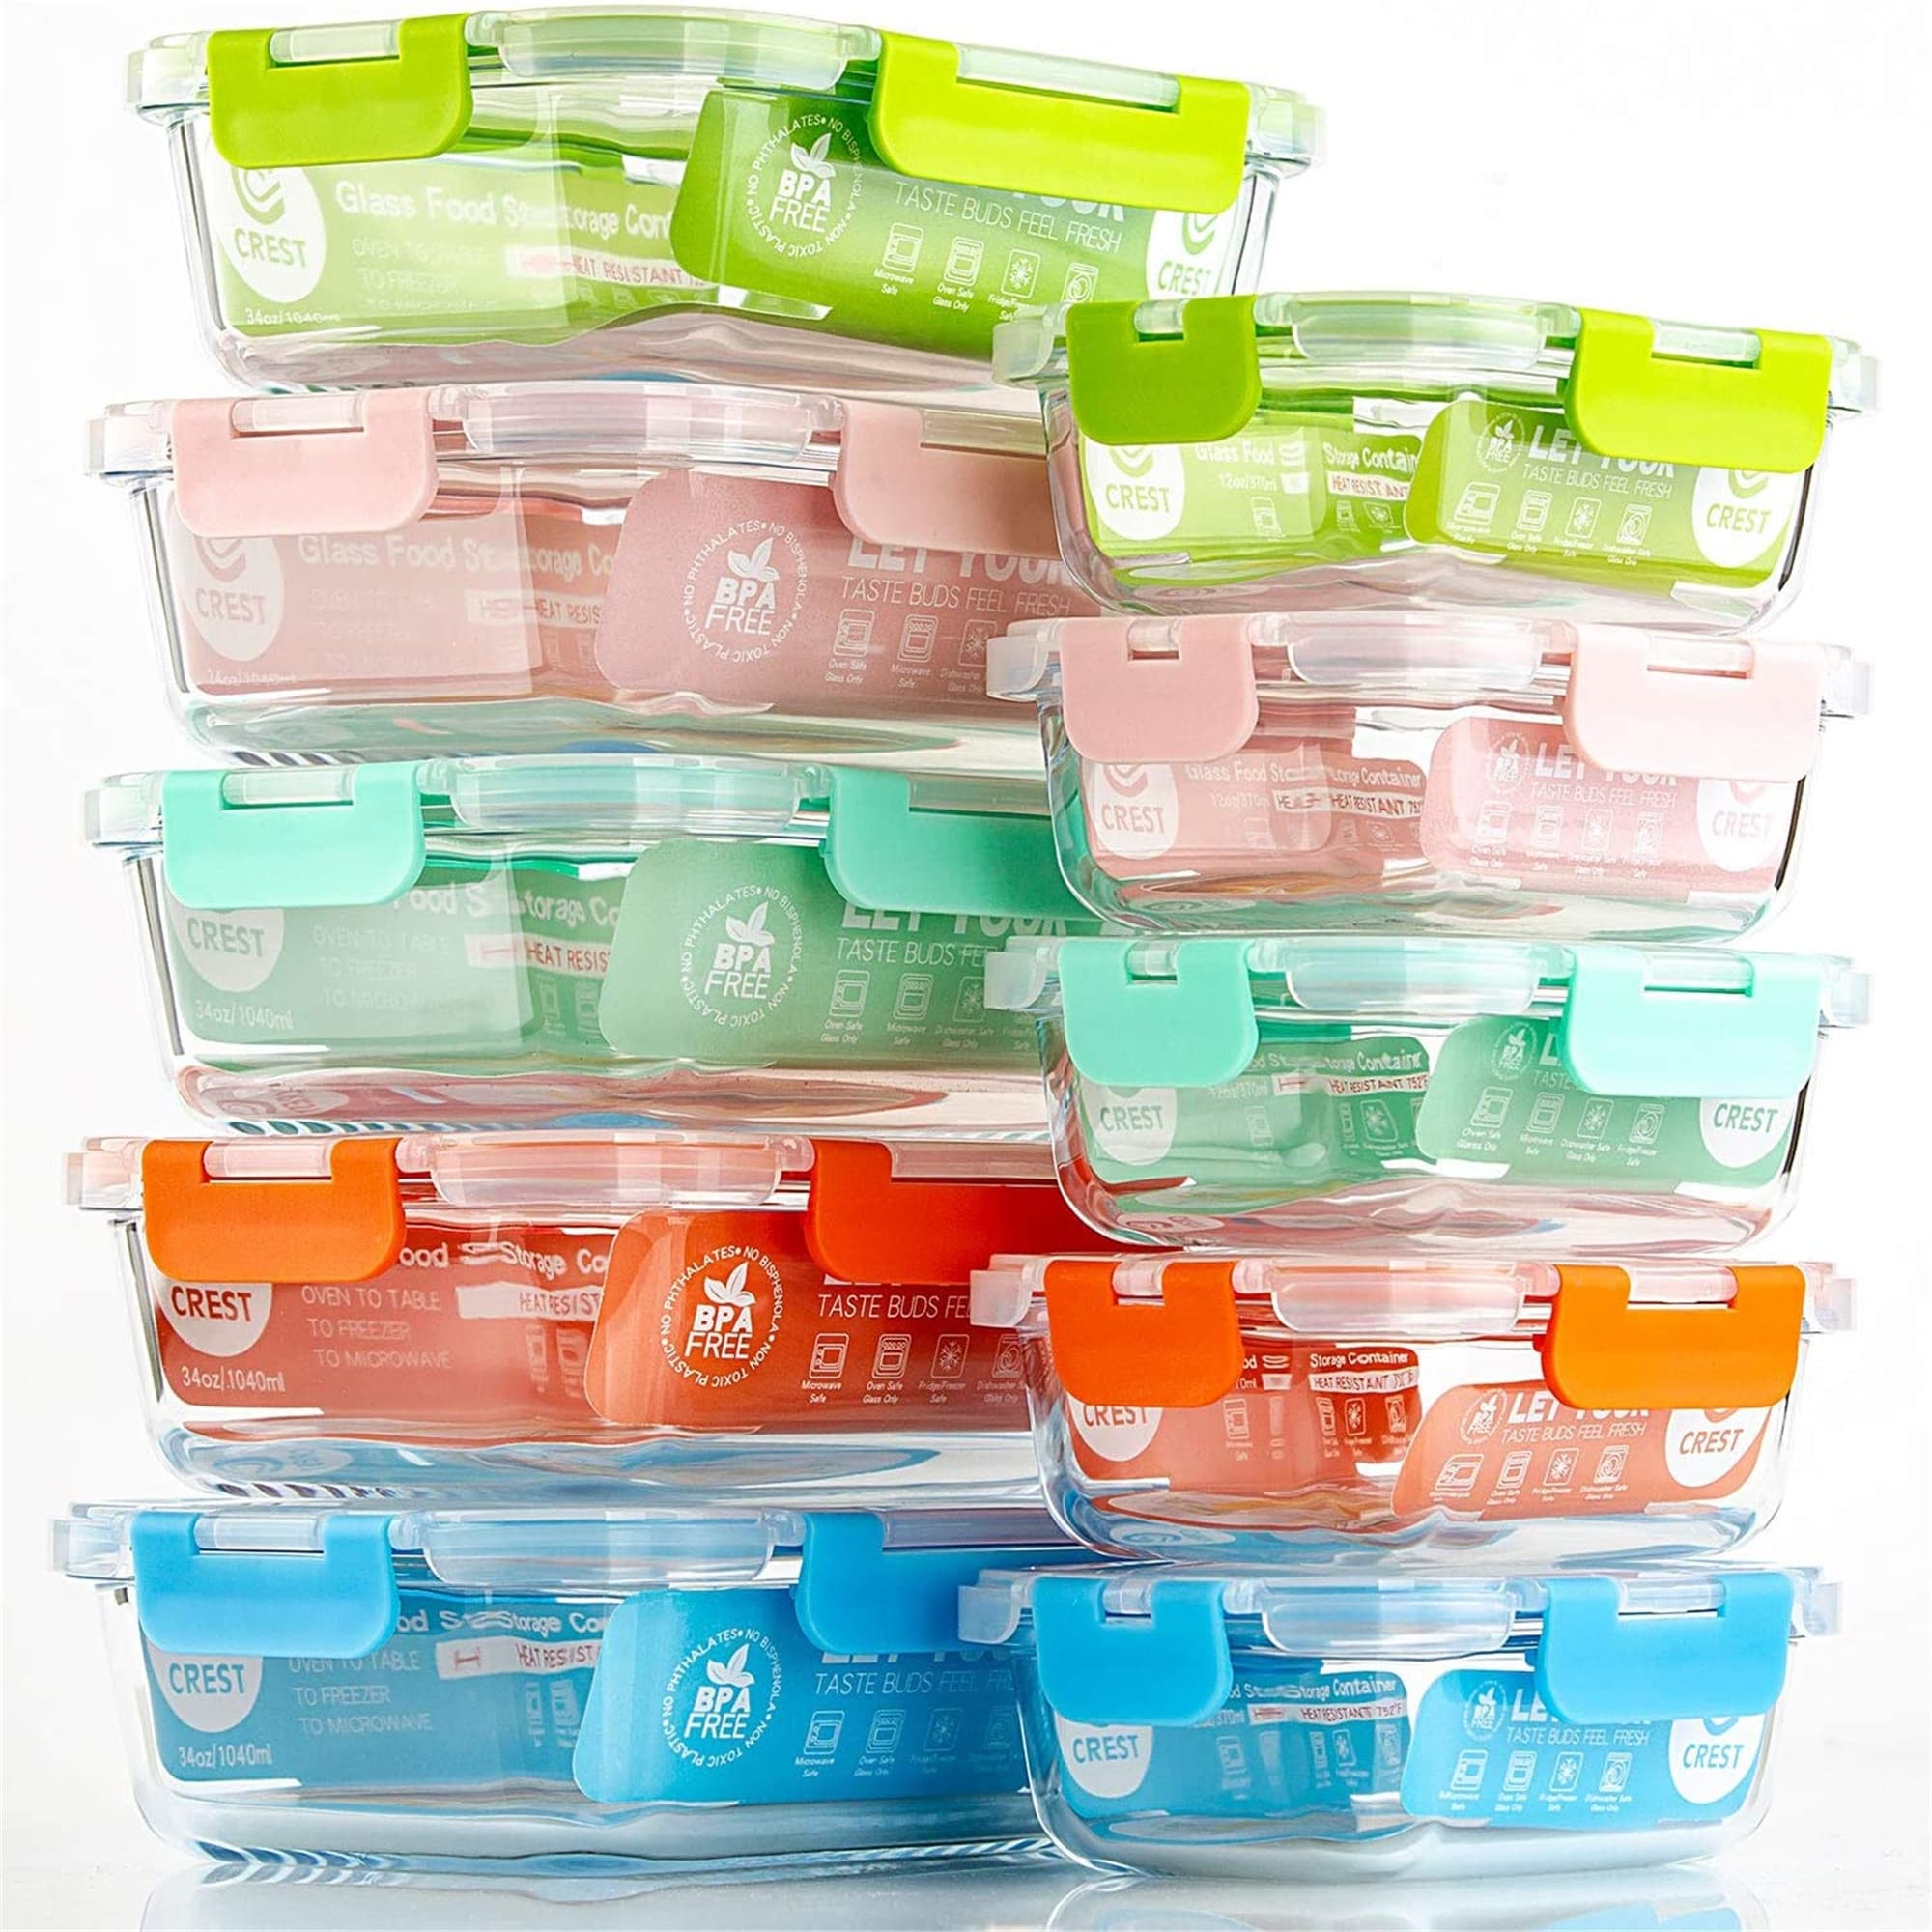 https://ak1.ostkcdn.com/images/products/is/images/direct/289616efc49280a95016d0fa5e7687e63472d494/10-Pack-Glass-Meal-Prep-Containers%2C-Food-Storage-Containers-Lids-Airtight%2C-Glass-Microwave%2C-Oven%2C-Freezer-and-Dishwasher-Safe.jpg